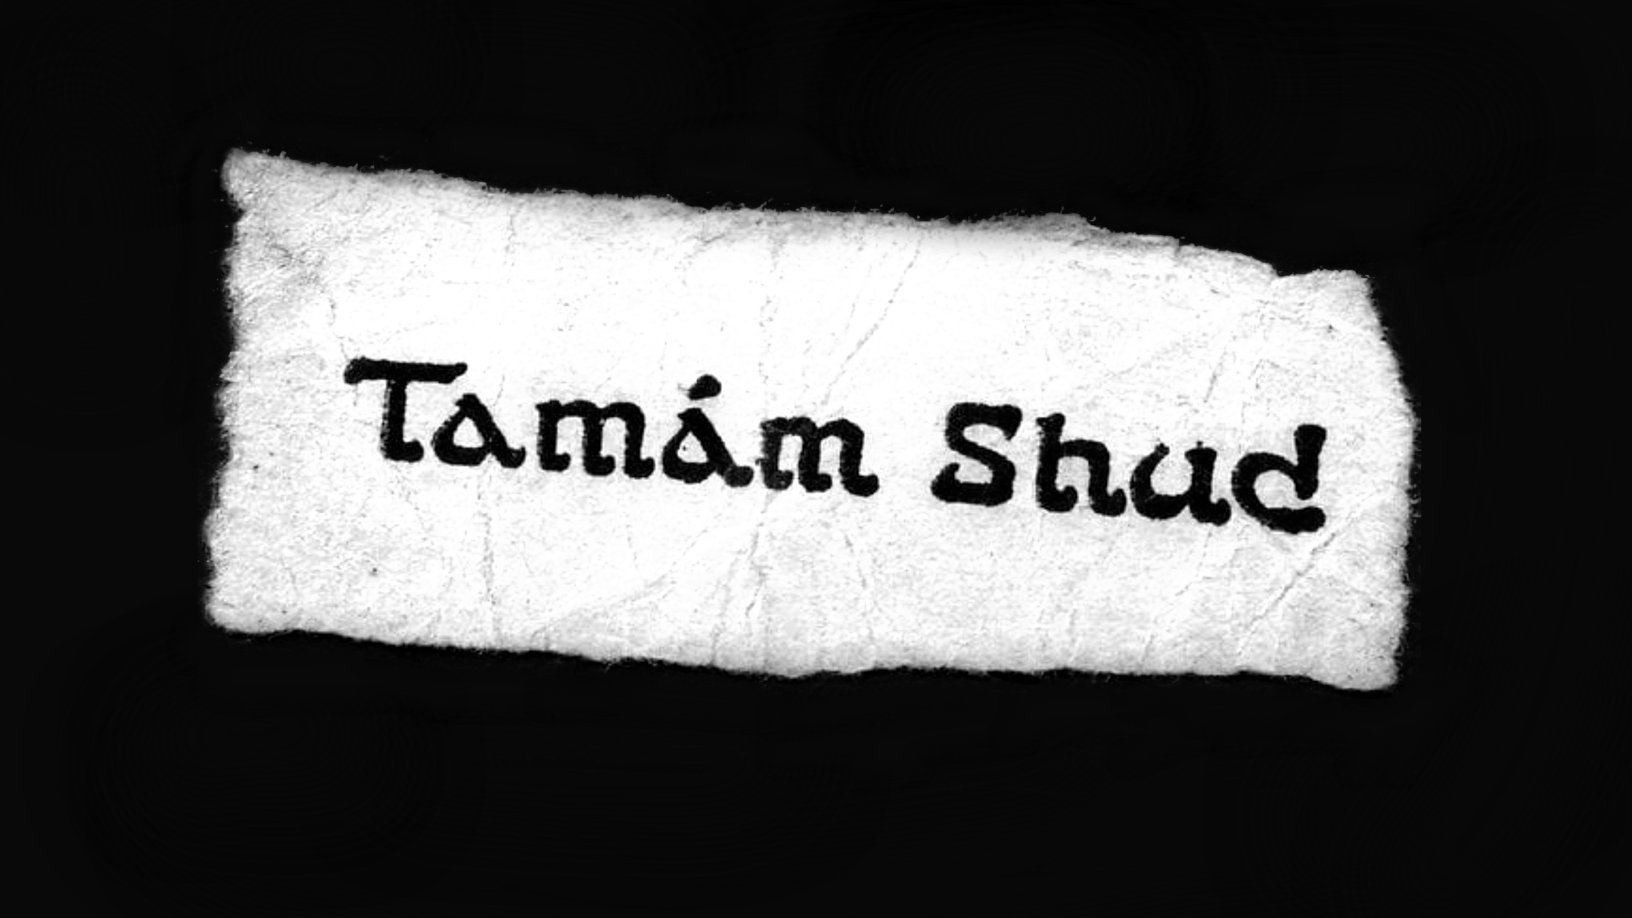 Tamám Shud – the unsolved mystery of the Somerton man 3